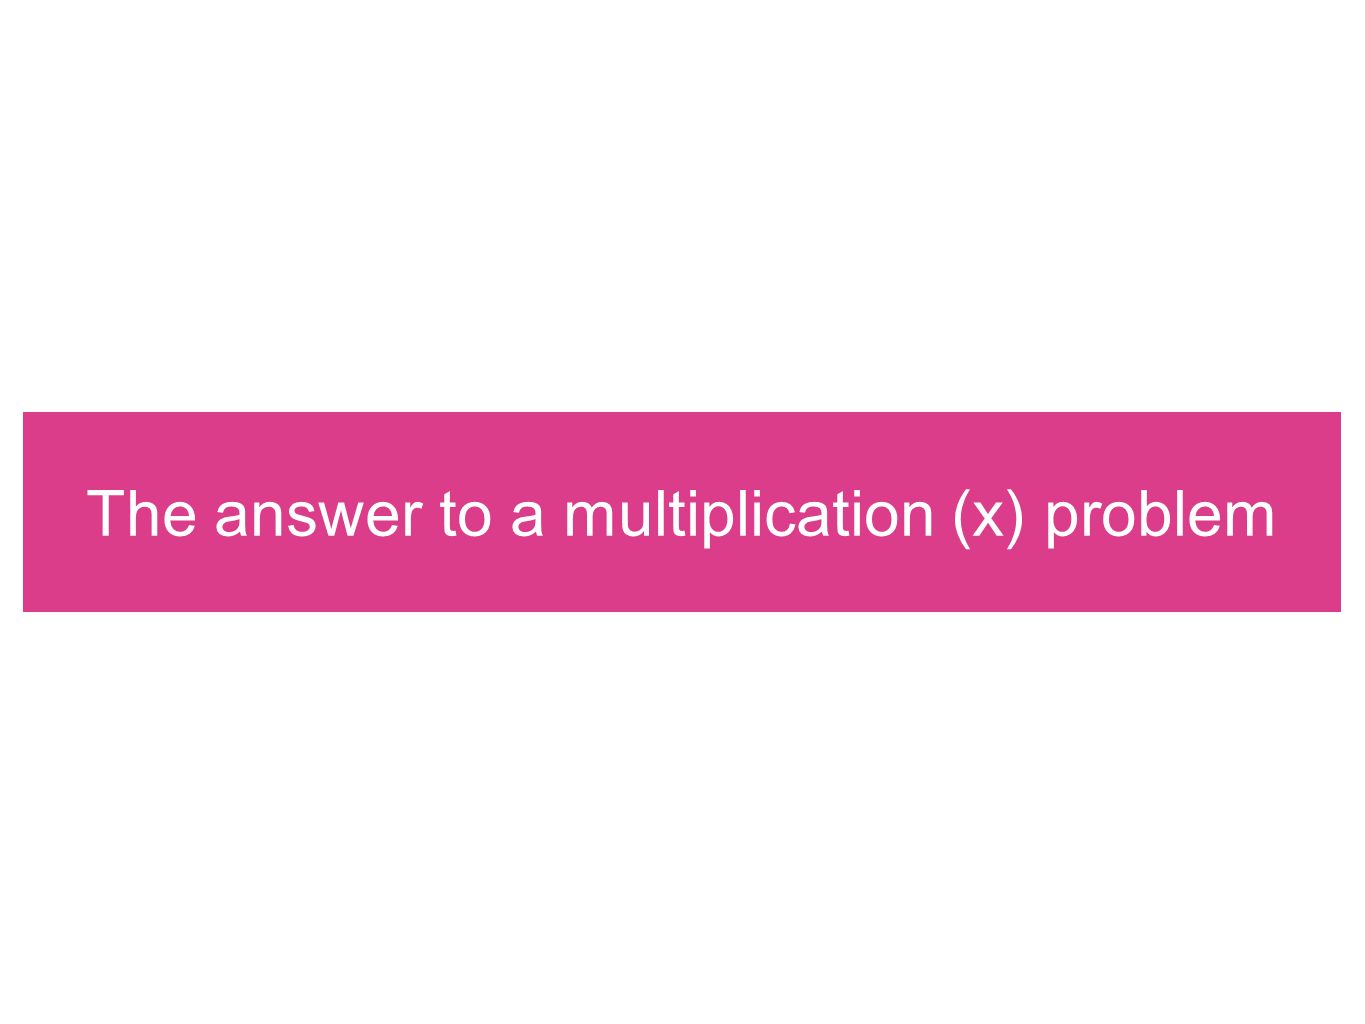 The answer to a multiplication (x) problem